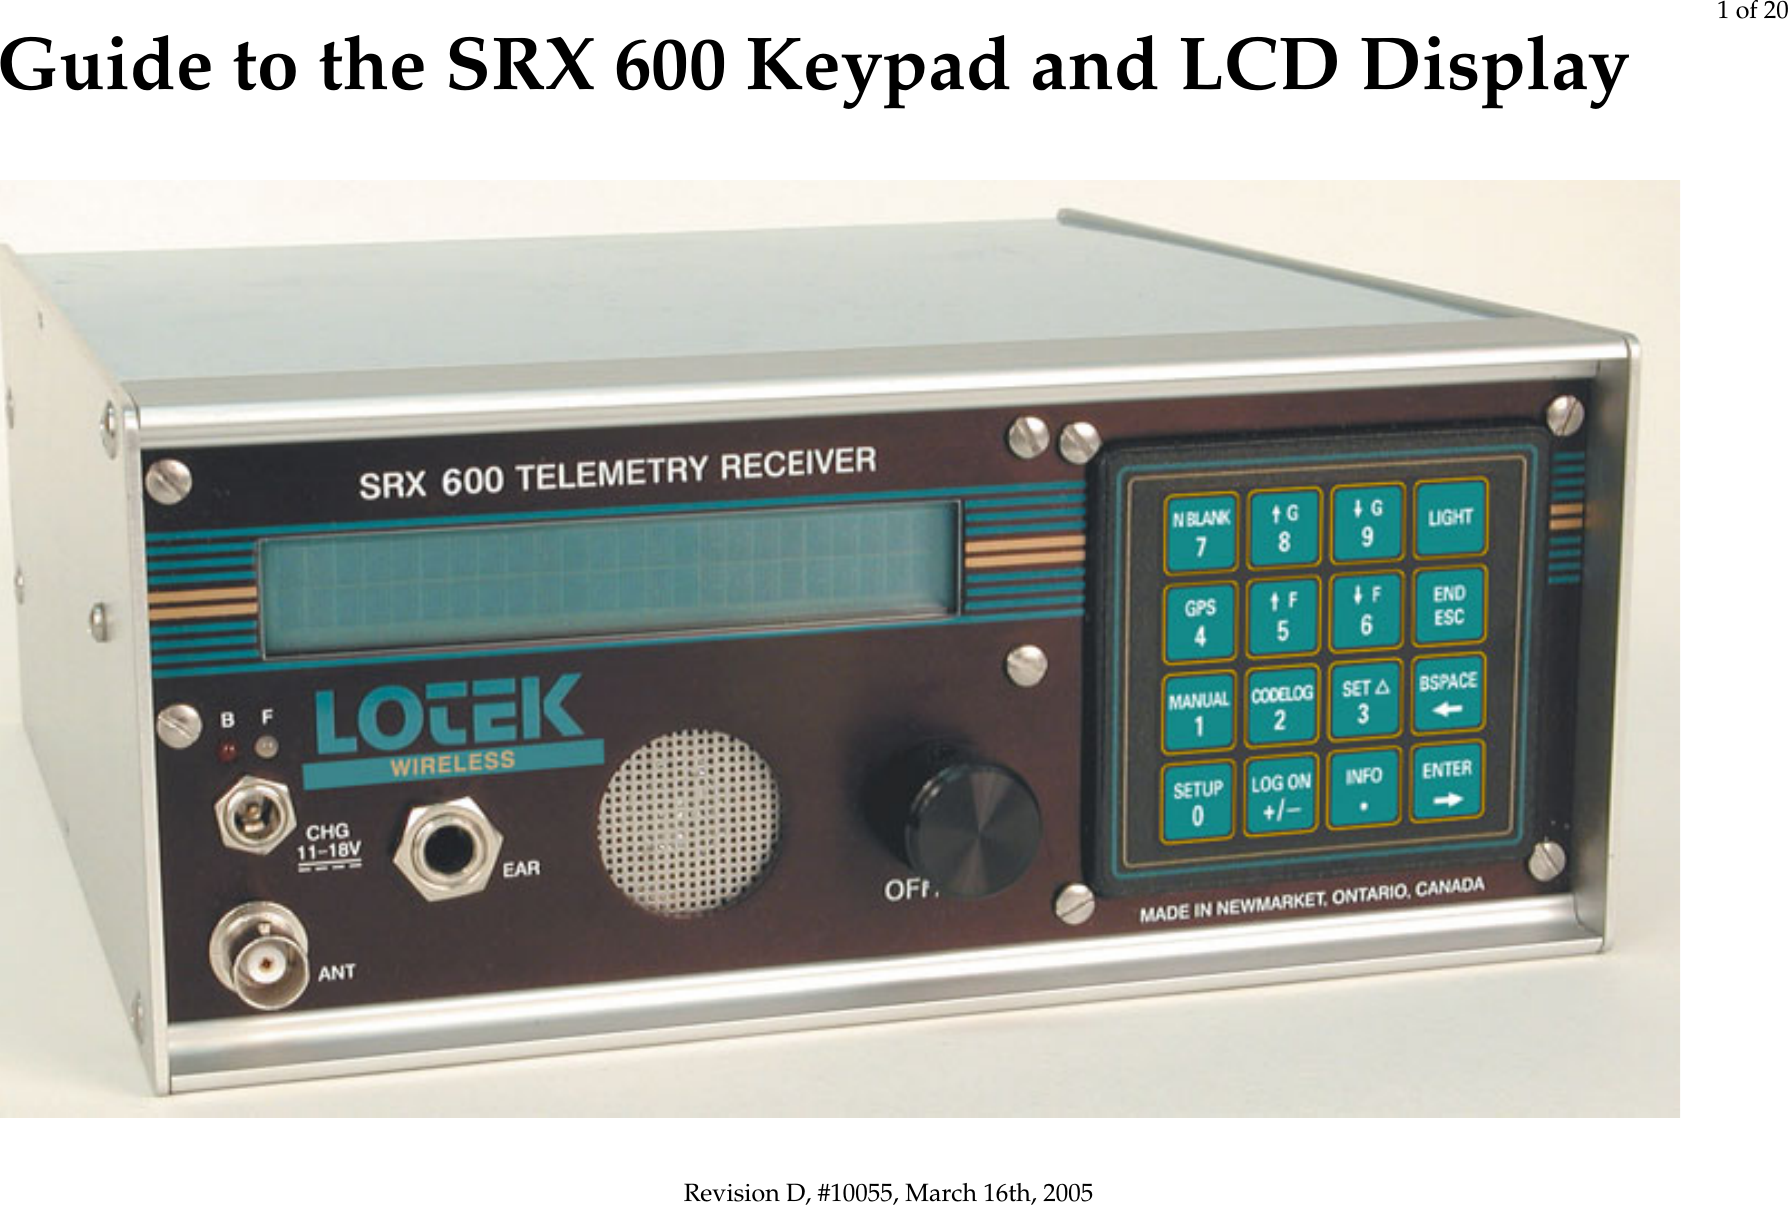 1 of 20Revision D, #10055, March 16th, 2005Guide to the SRX 600 Keypad and LCD Display 